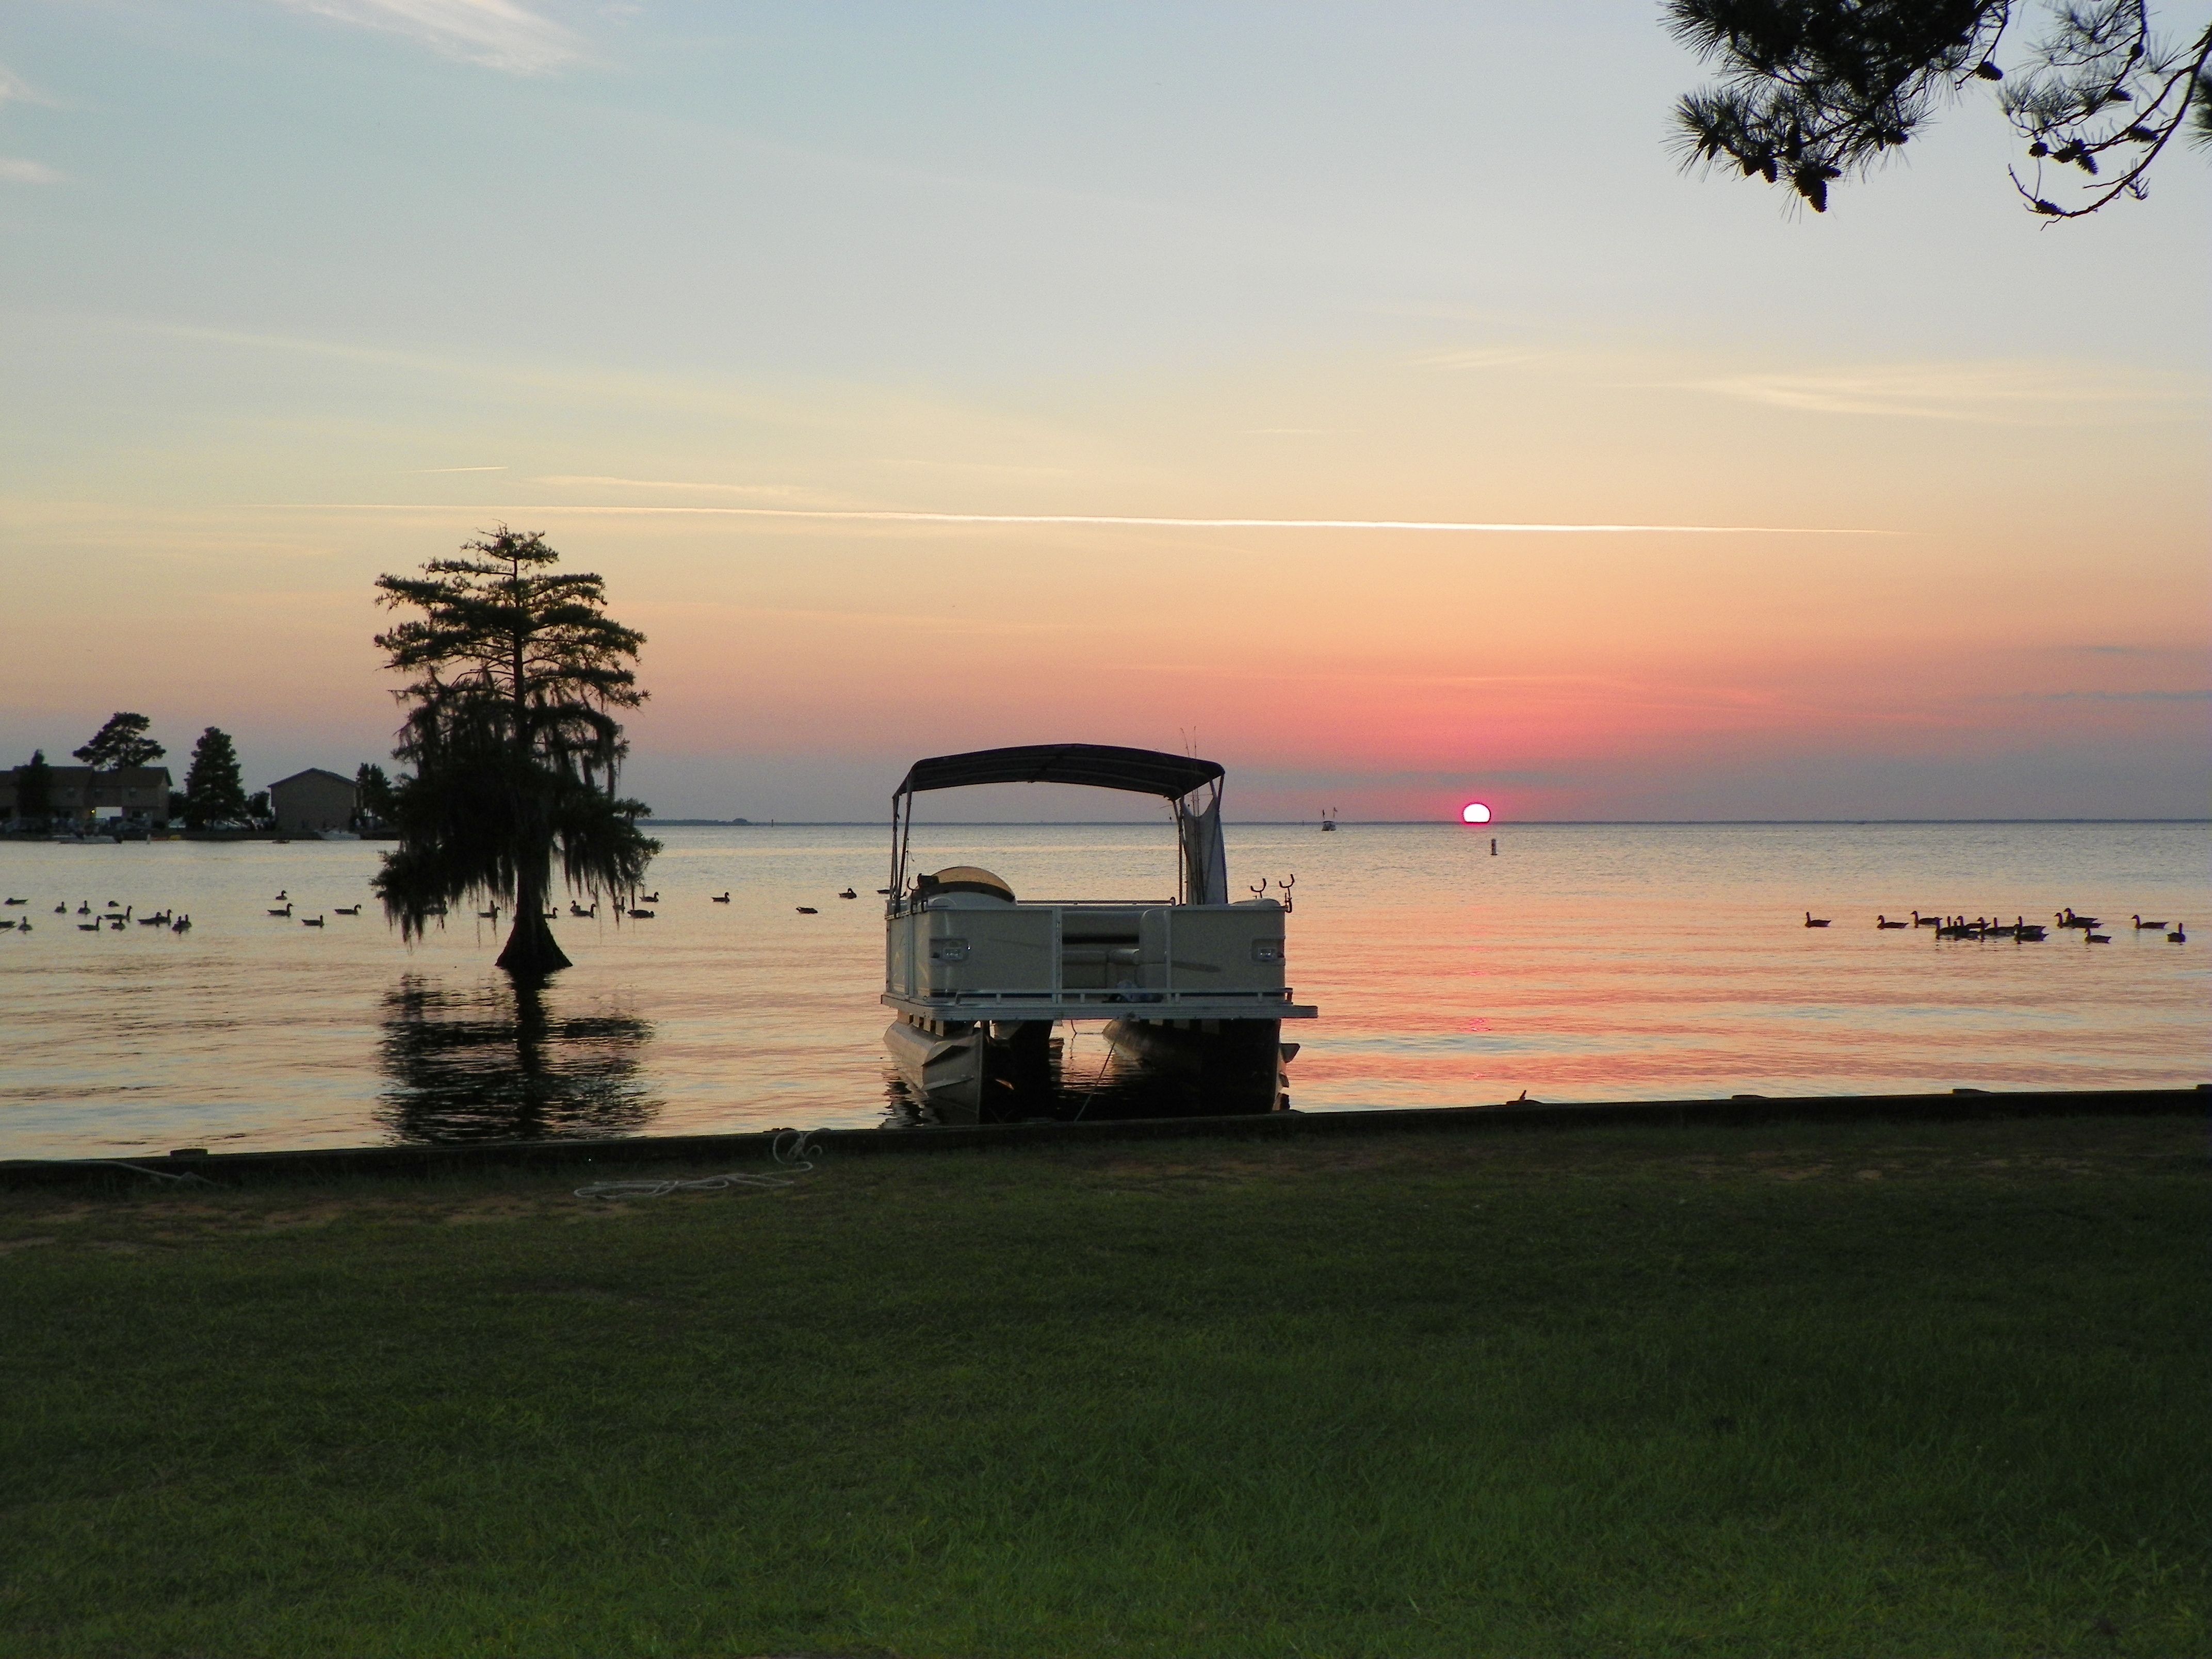 Sunset on Lake Moultrie @ MWR Short Stay in SC | Boating, camping ...